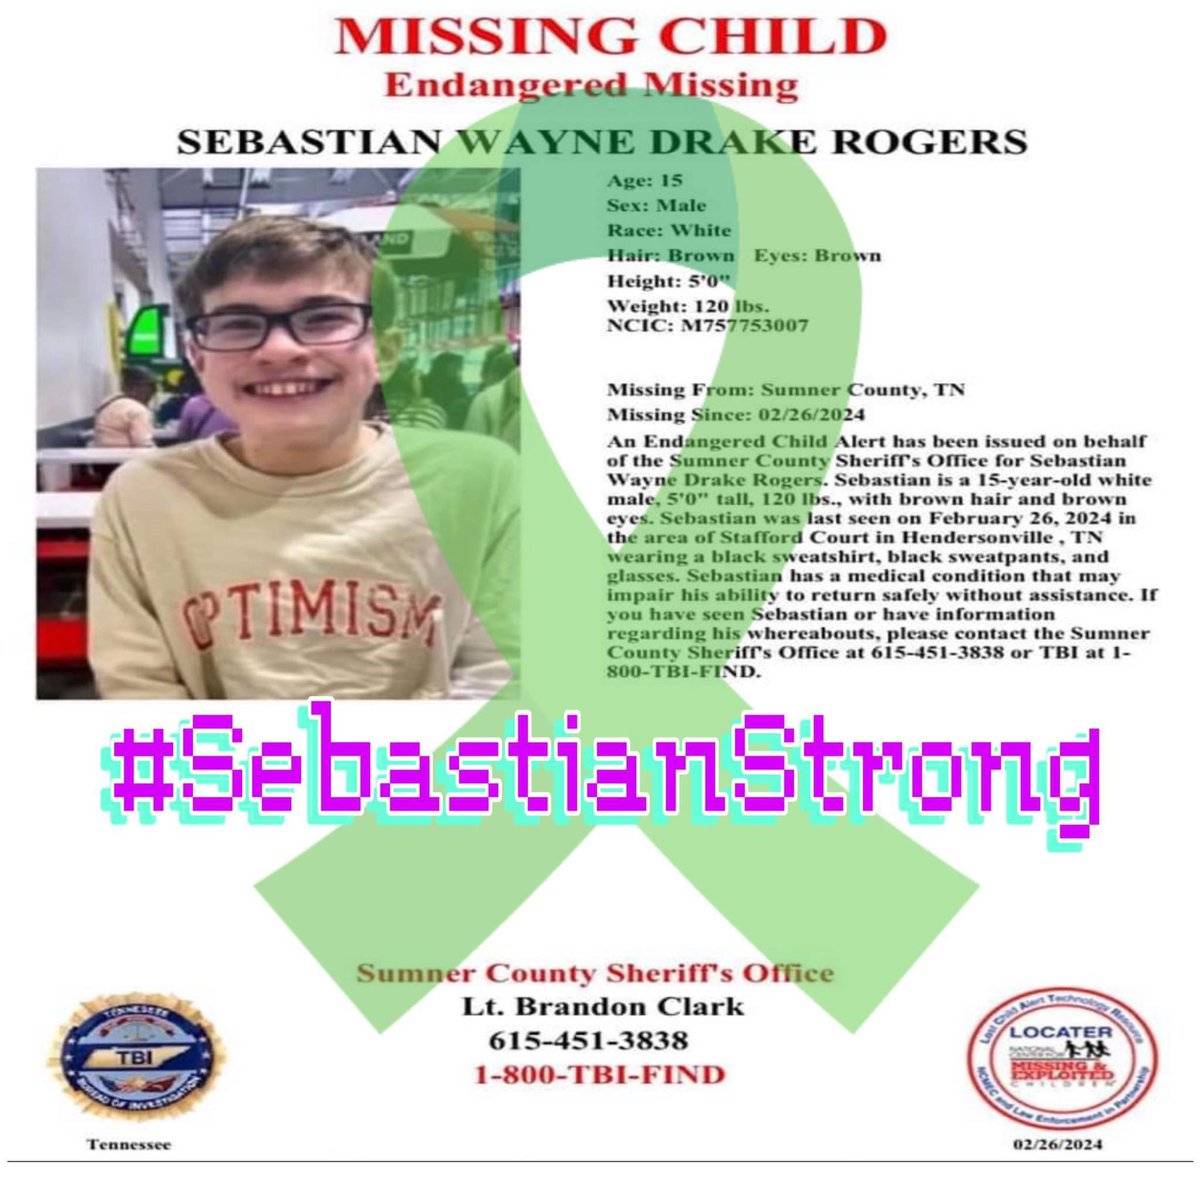 Going on day #52! I’m so sorry we all failed you sweet boy. I don’t know you personally but I’ve been following your case and I hope and pray every single day that you’re found safely. #Sebastianstrong #SebastianRogers #SethRogers #SebastiansArmy💚💚💚💚